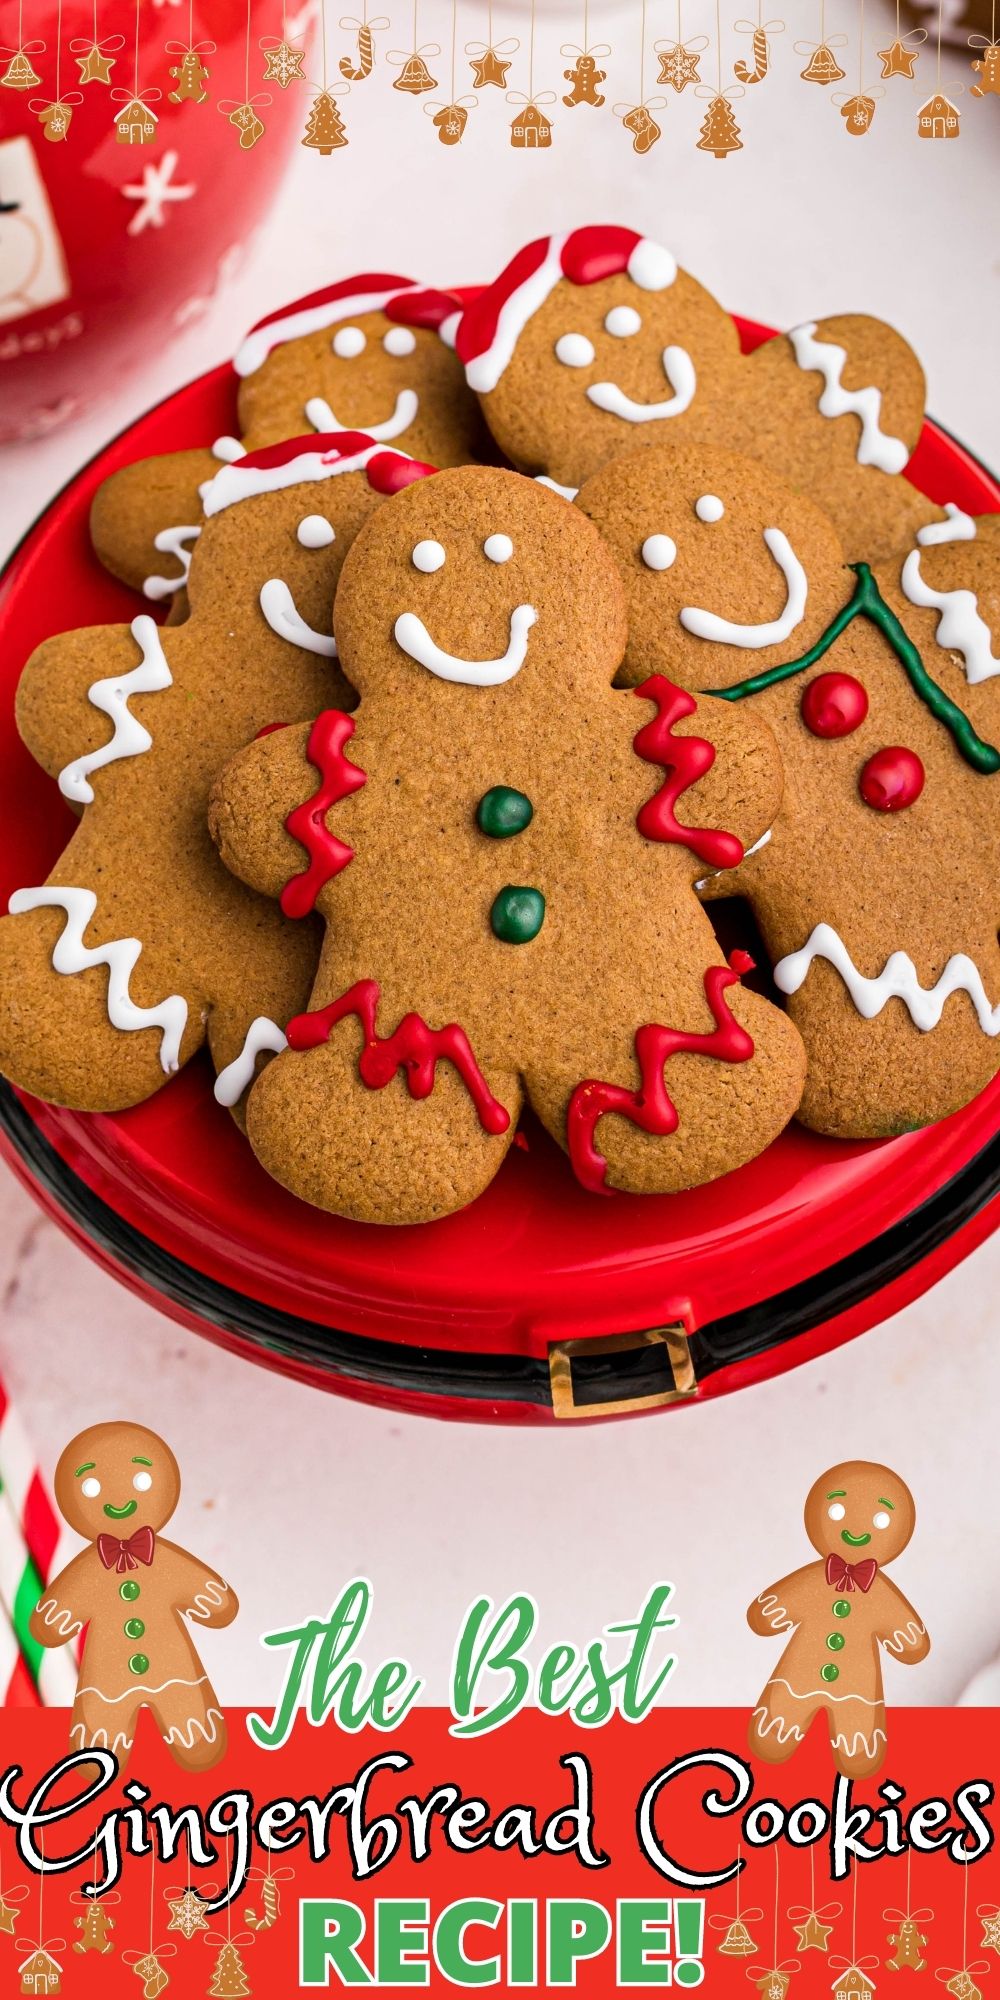 Kick of your holiday season with the BEST Gingerbread Cookies Recipe. These soft and chewy cookies are bursting with gingerbread flavor.